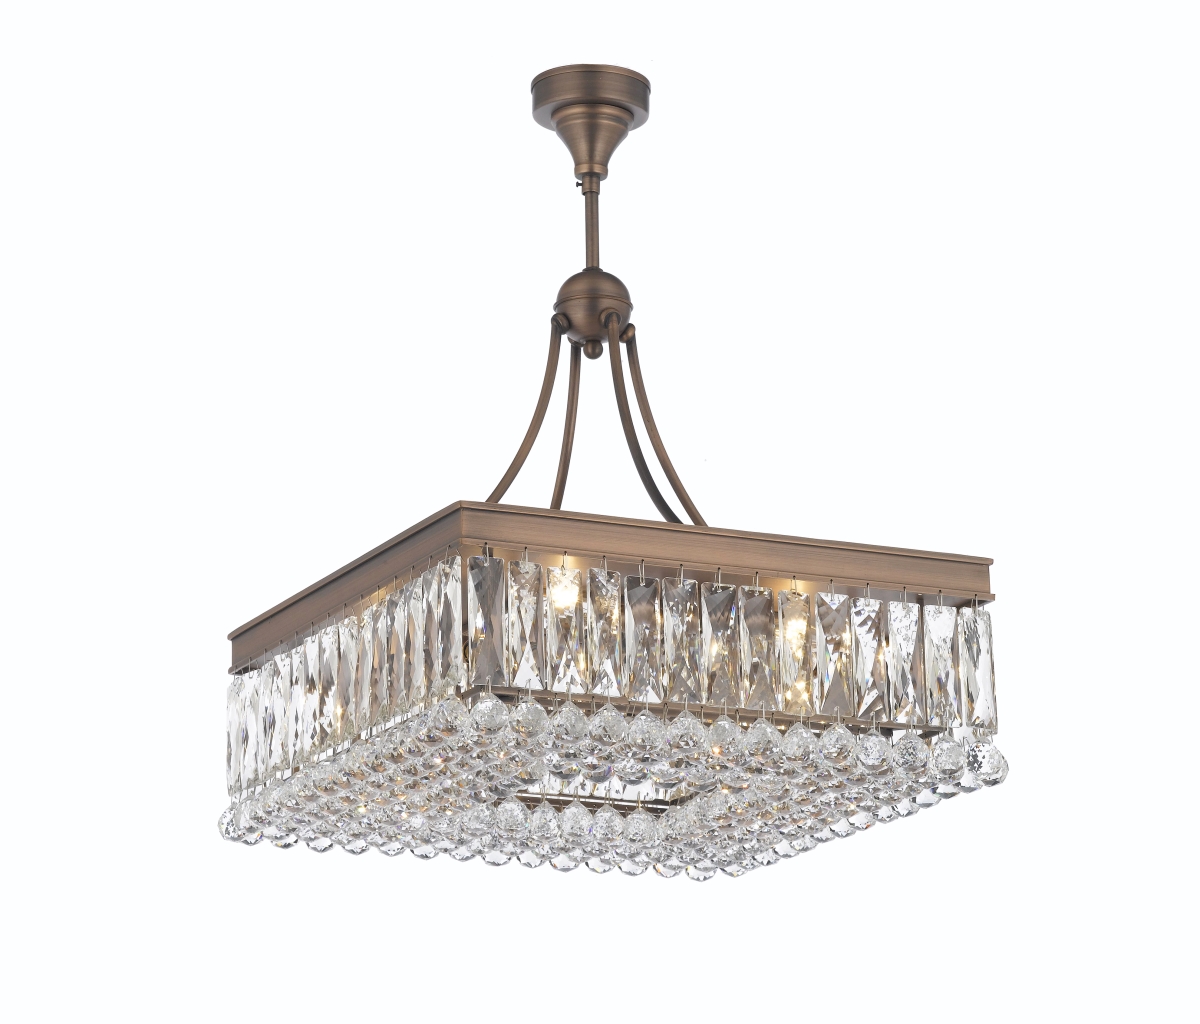 Pwg Lighting 2904-20-ac 20 In. Valencia Hanging Chandelier With Heirloom Grandcut Crystals - Antique Copper